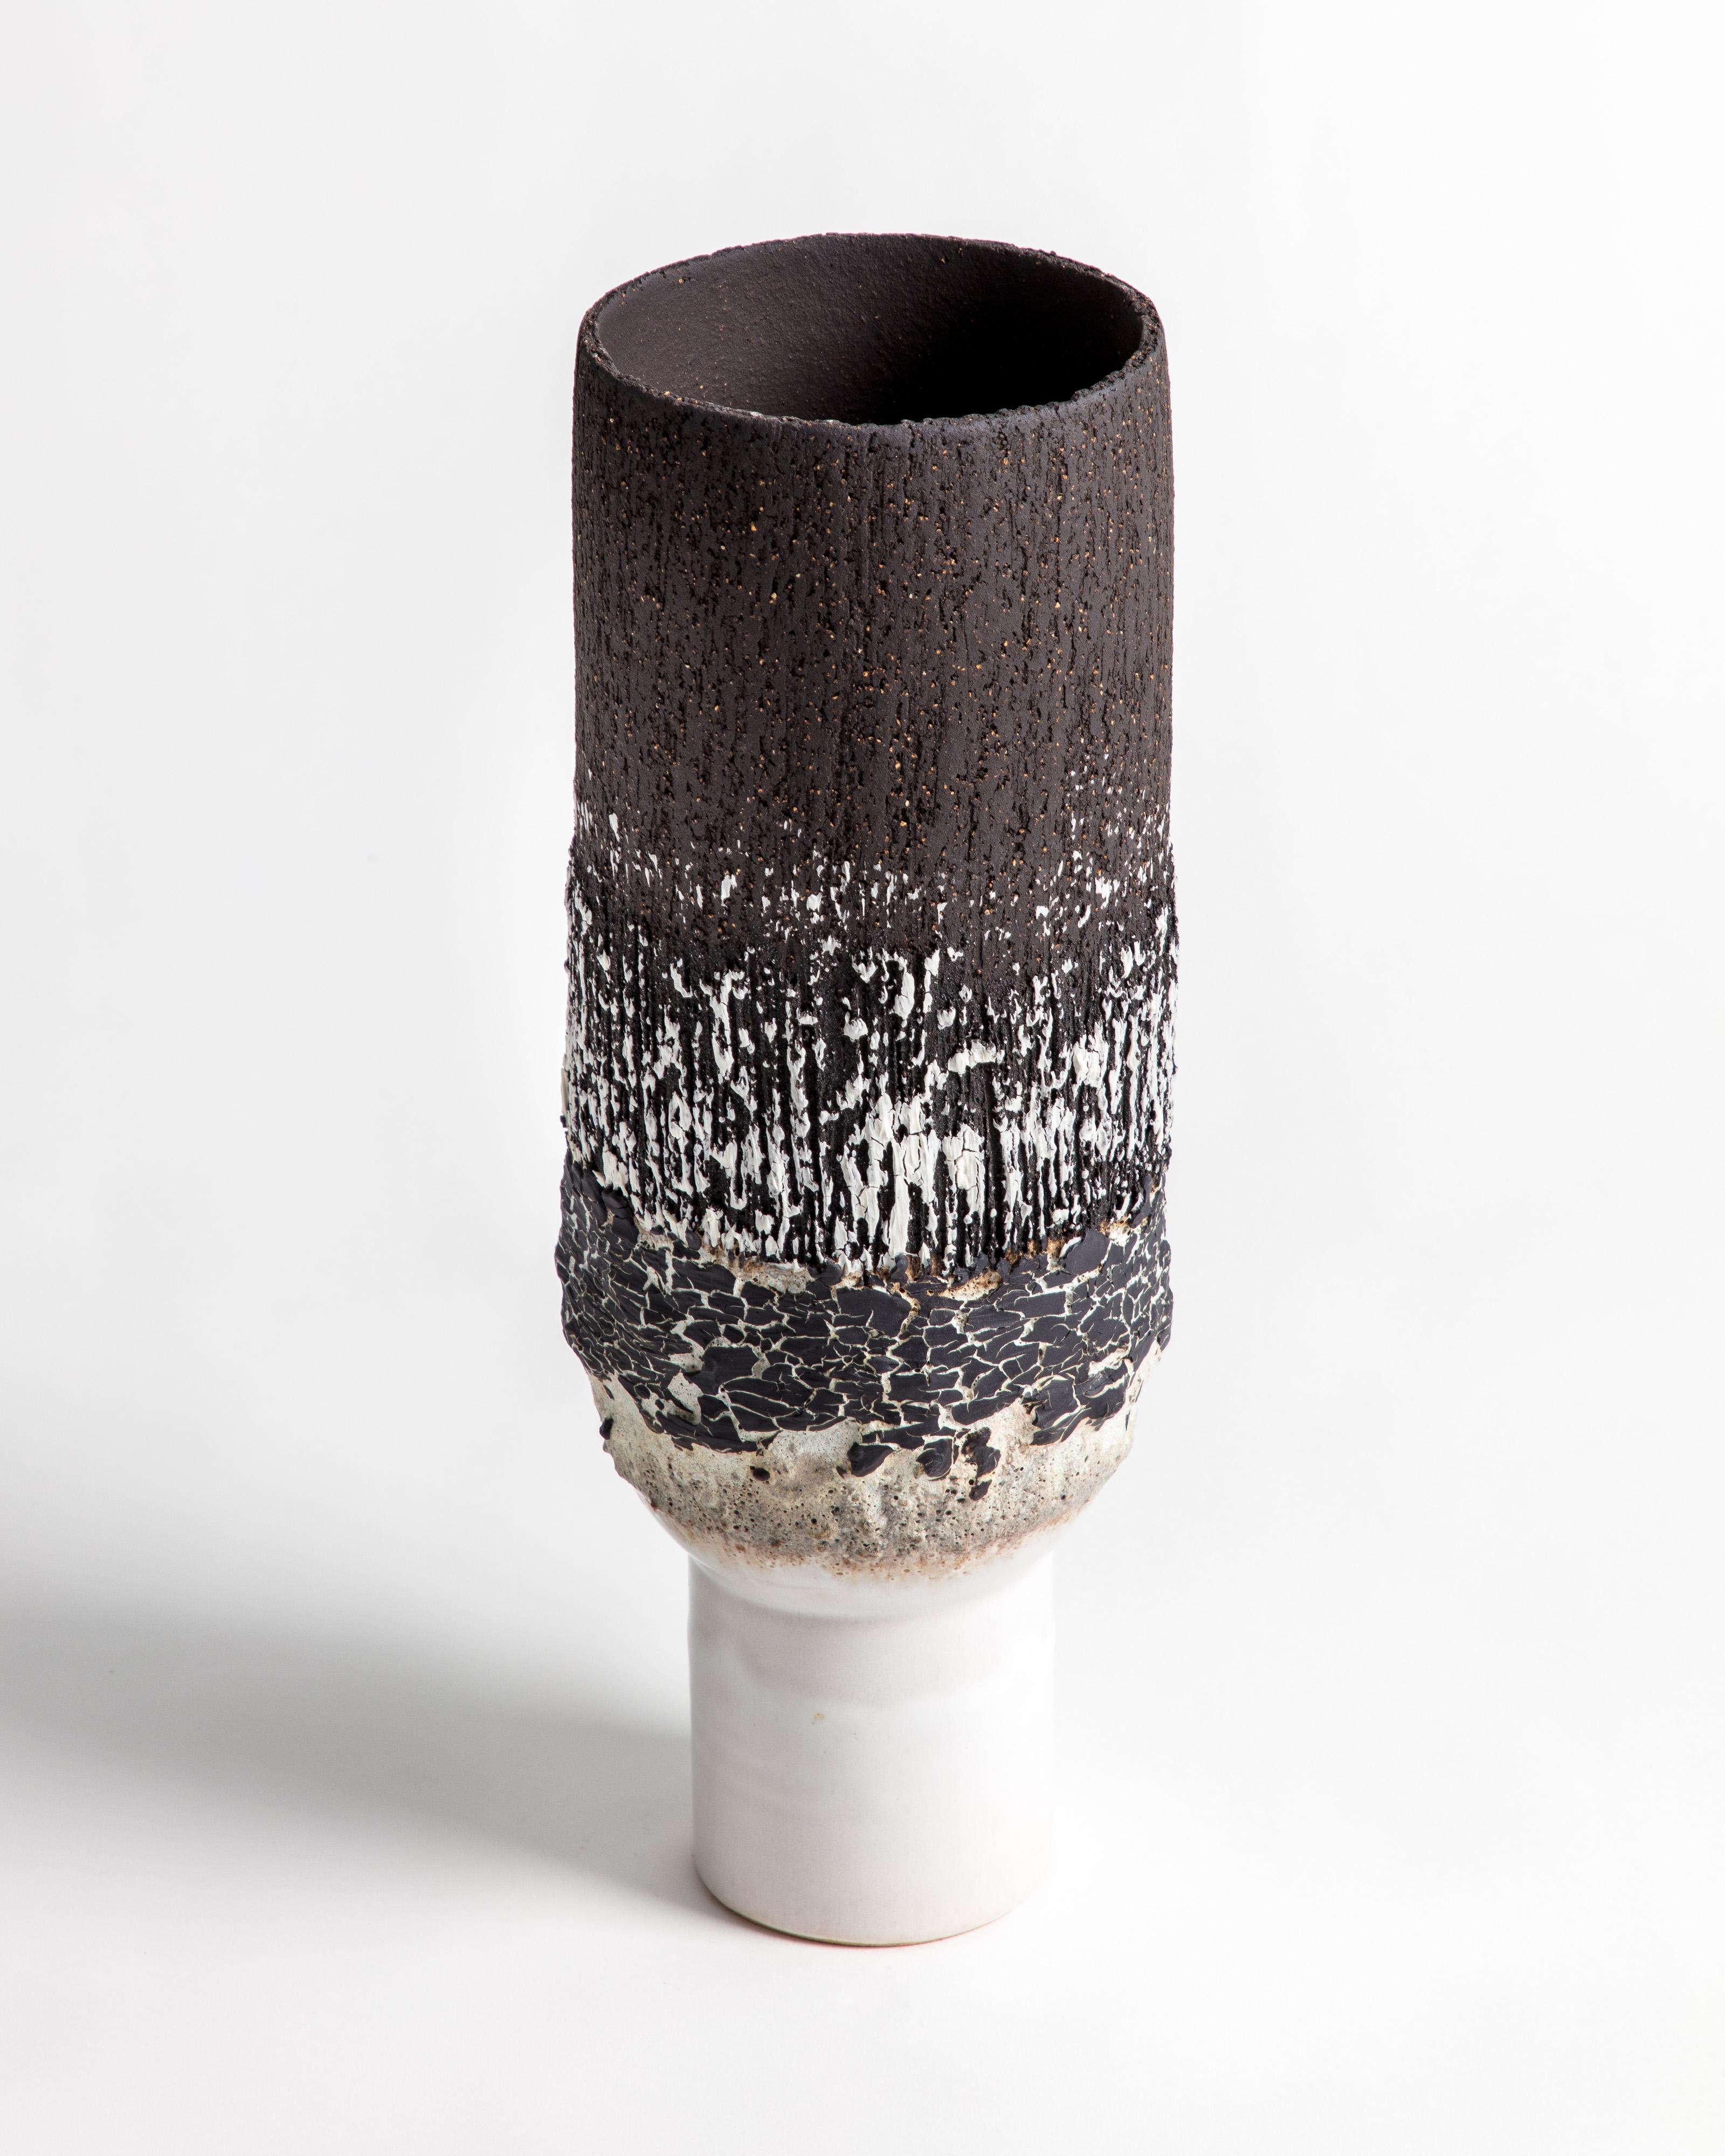 An elegant volcanic pedestal vase in black and white stoneware with black cracked porcelain engobe.

Inspiration for the piece comes from the clay itself and the chemical relationships that glaze and volcanic matter create. Travels around the